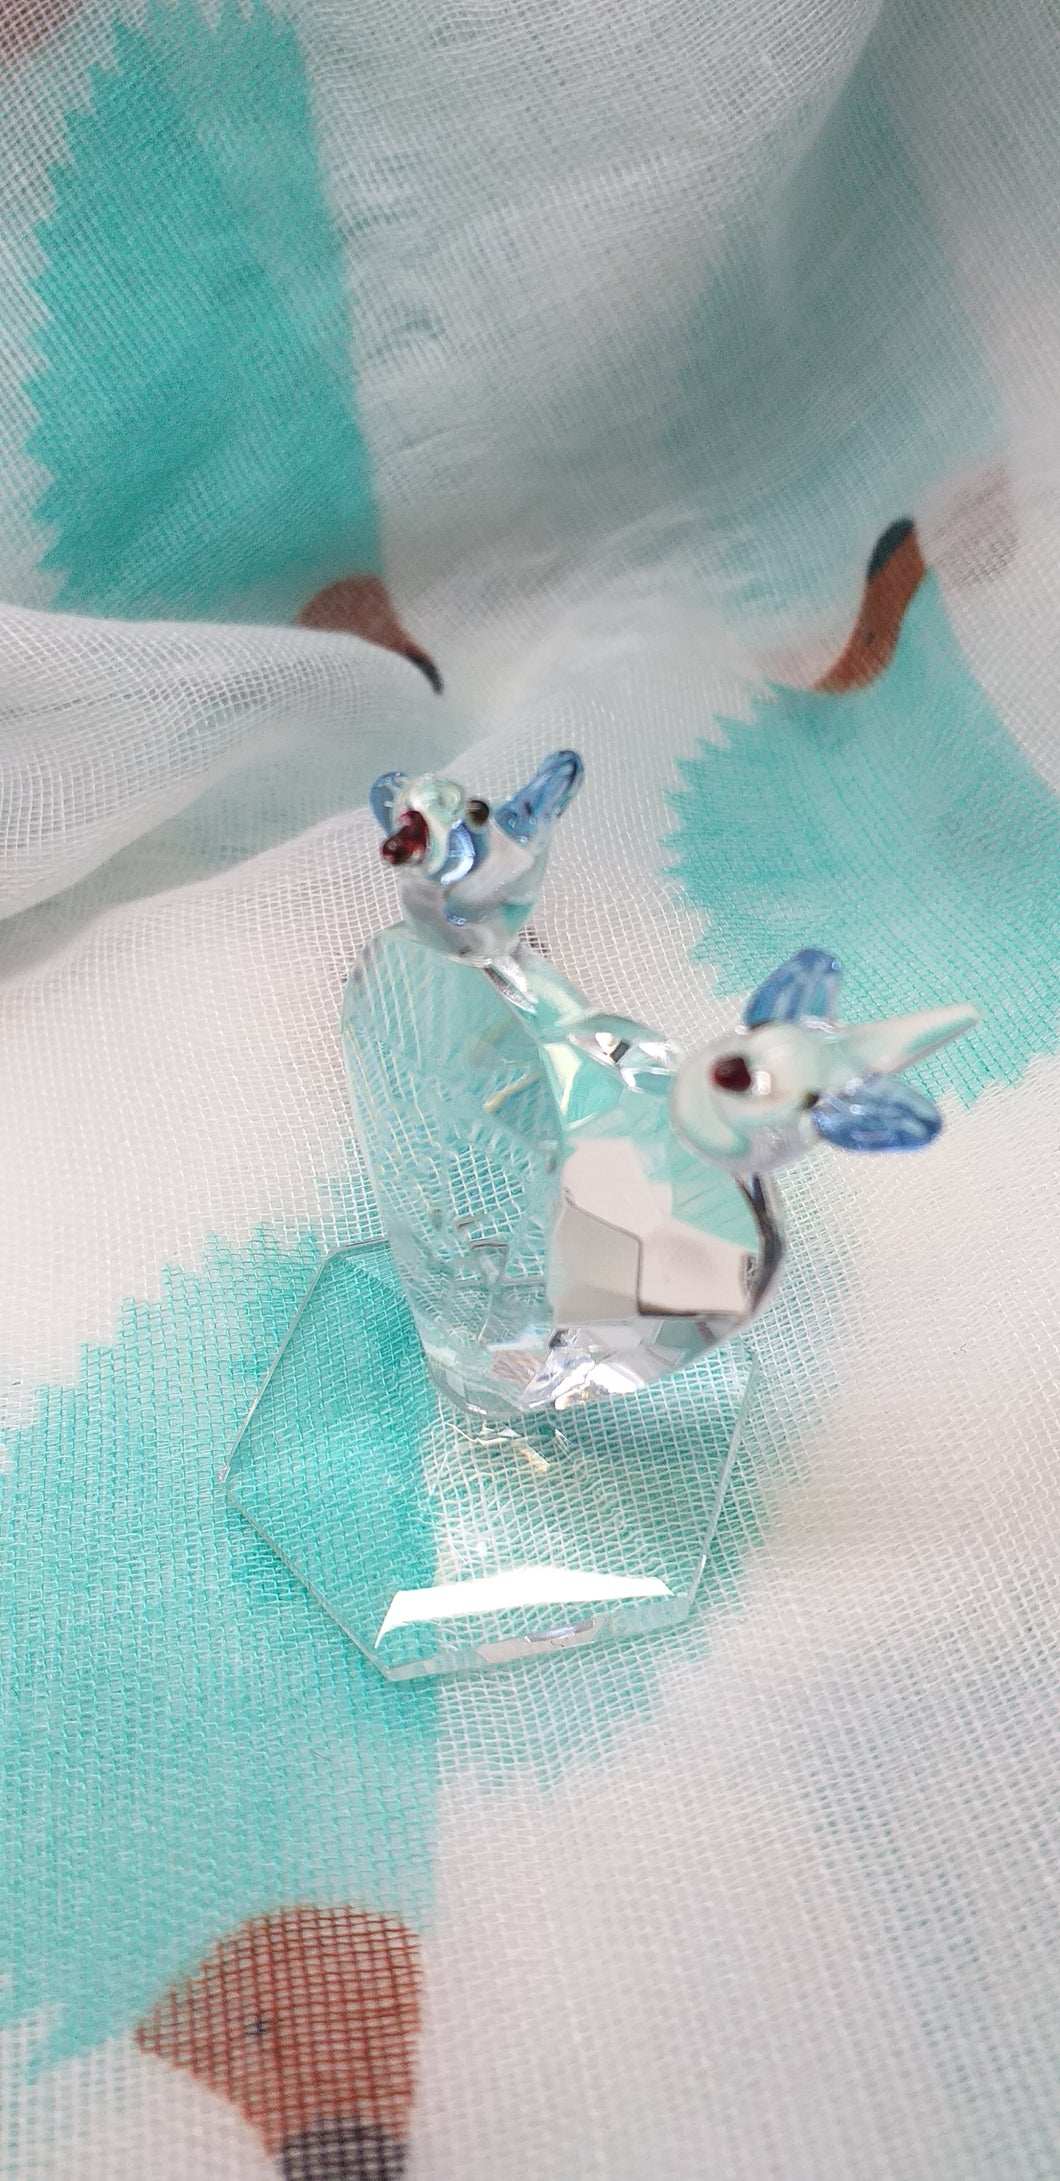 Crystal glass heart with birds